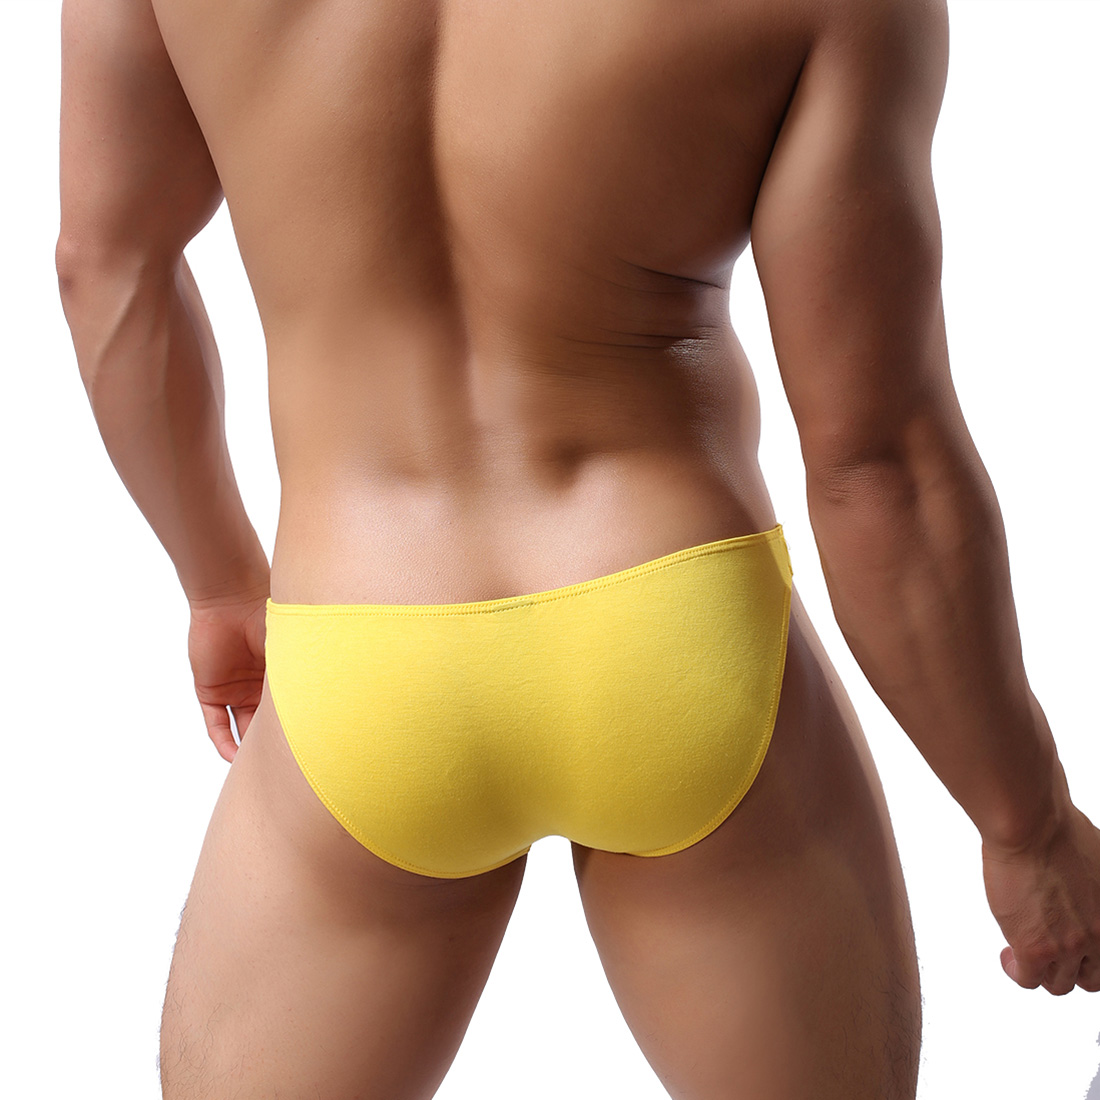 Men's Sexy Lingerie Underwear Modal Triangle Pants Shorts with Penis Sheath WH8 Yellow XL